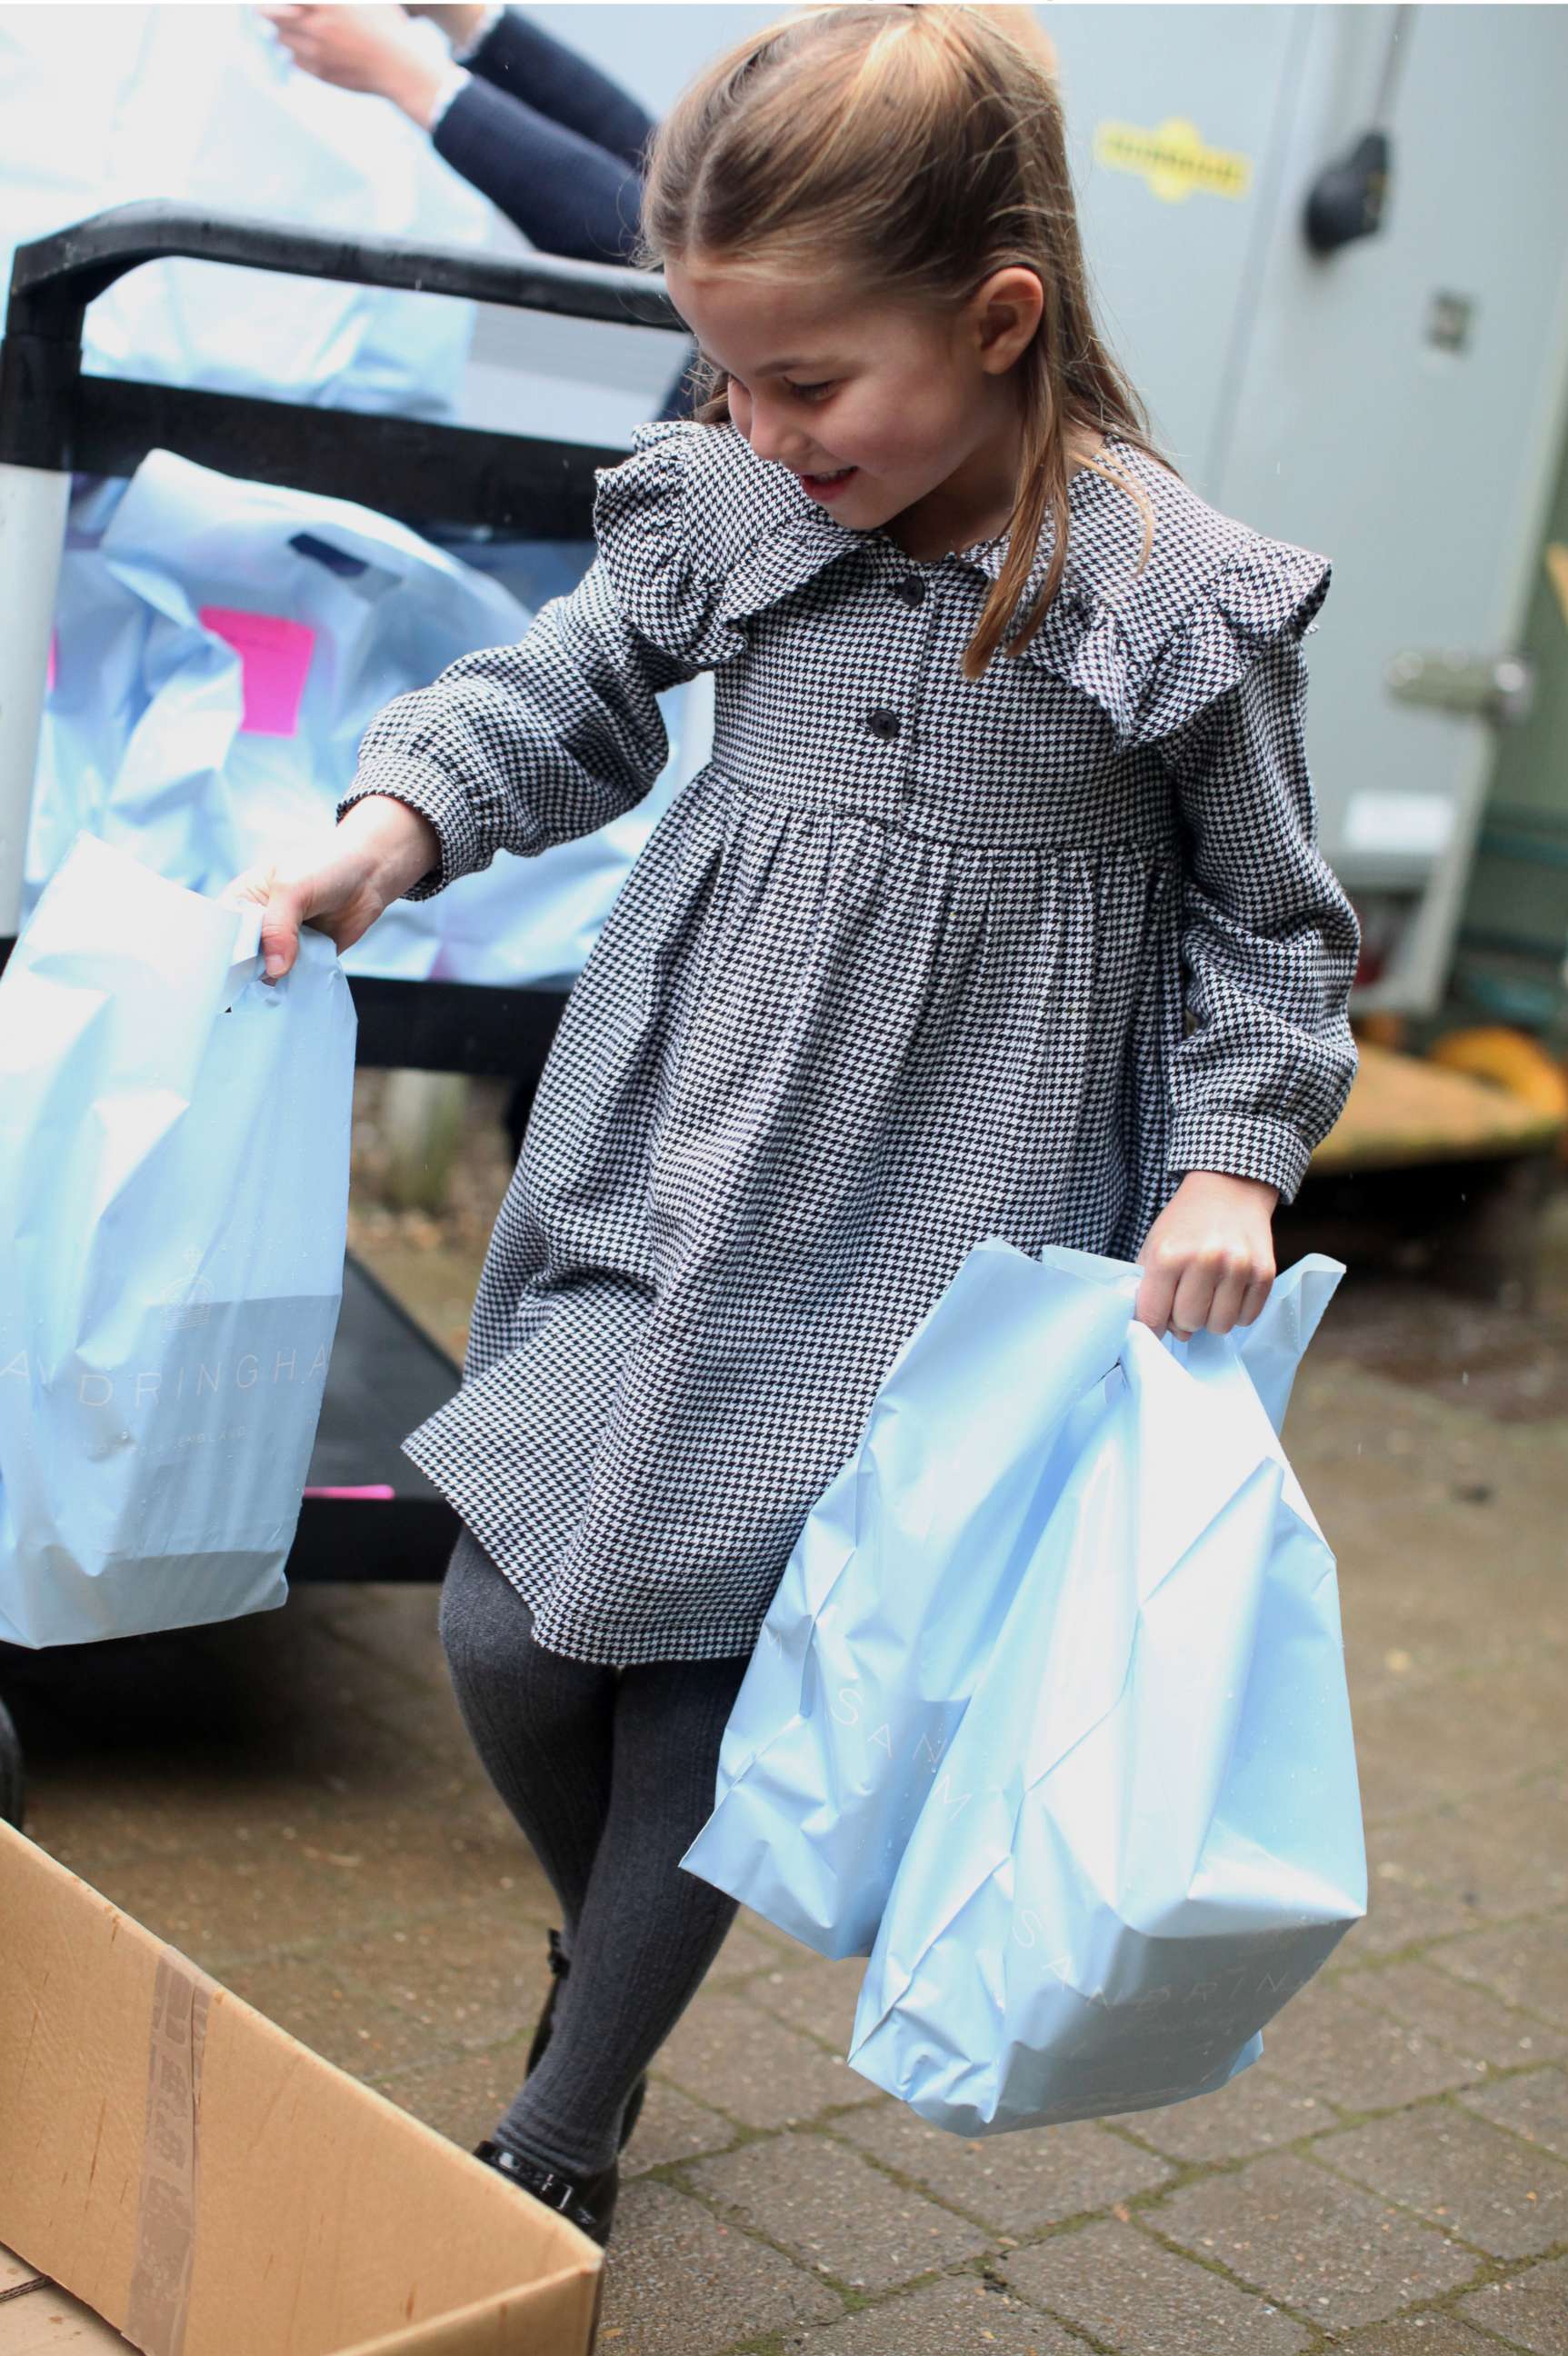 PHOTO: Princess Charlotte helps to pack up and deliver food packages for isolated pensioners in the local area along with her family.